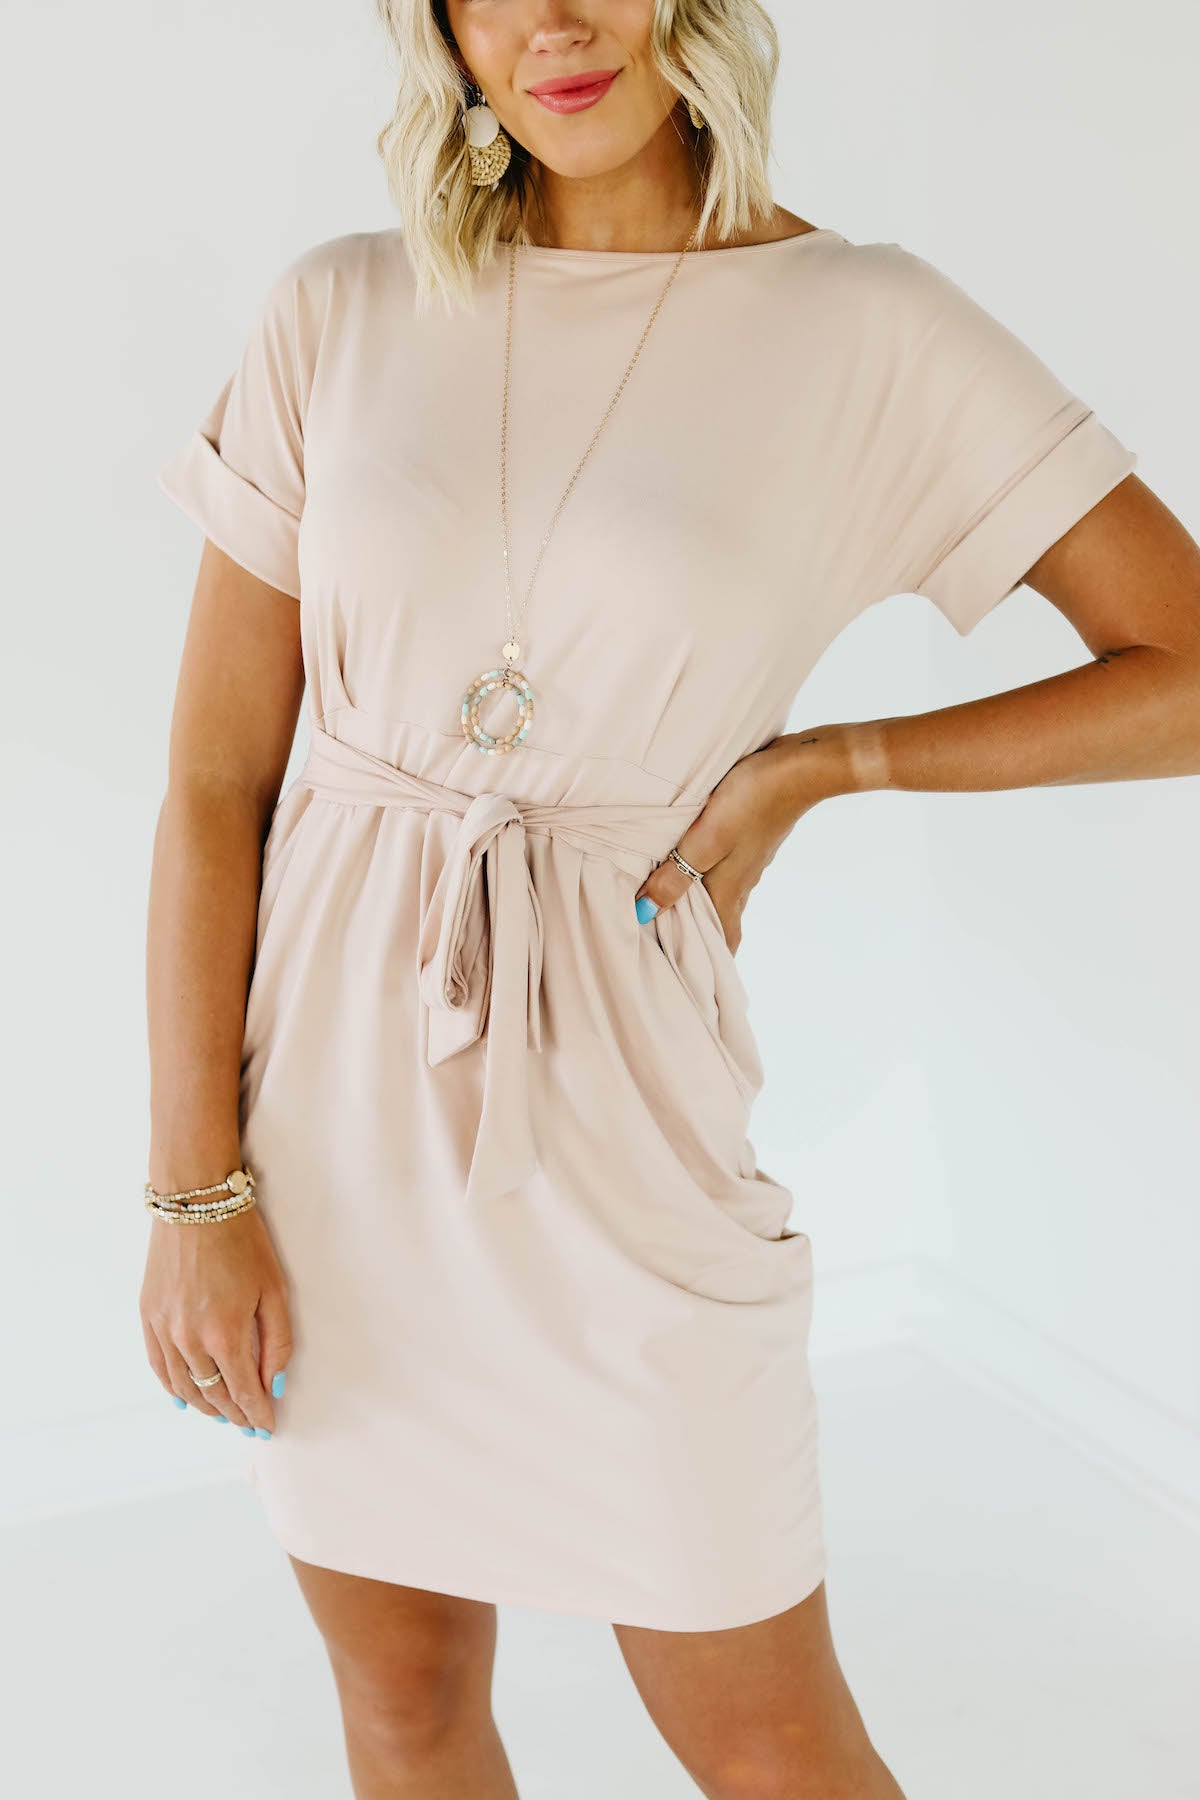 The Lacey Round Neck Dress